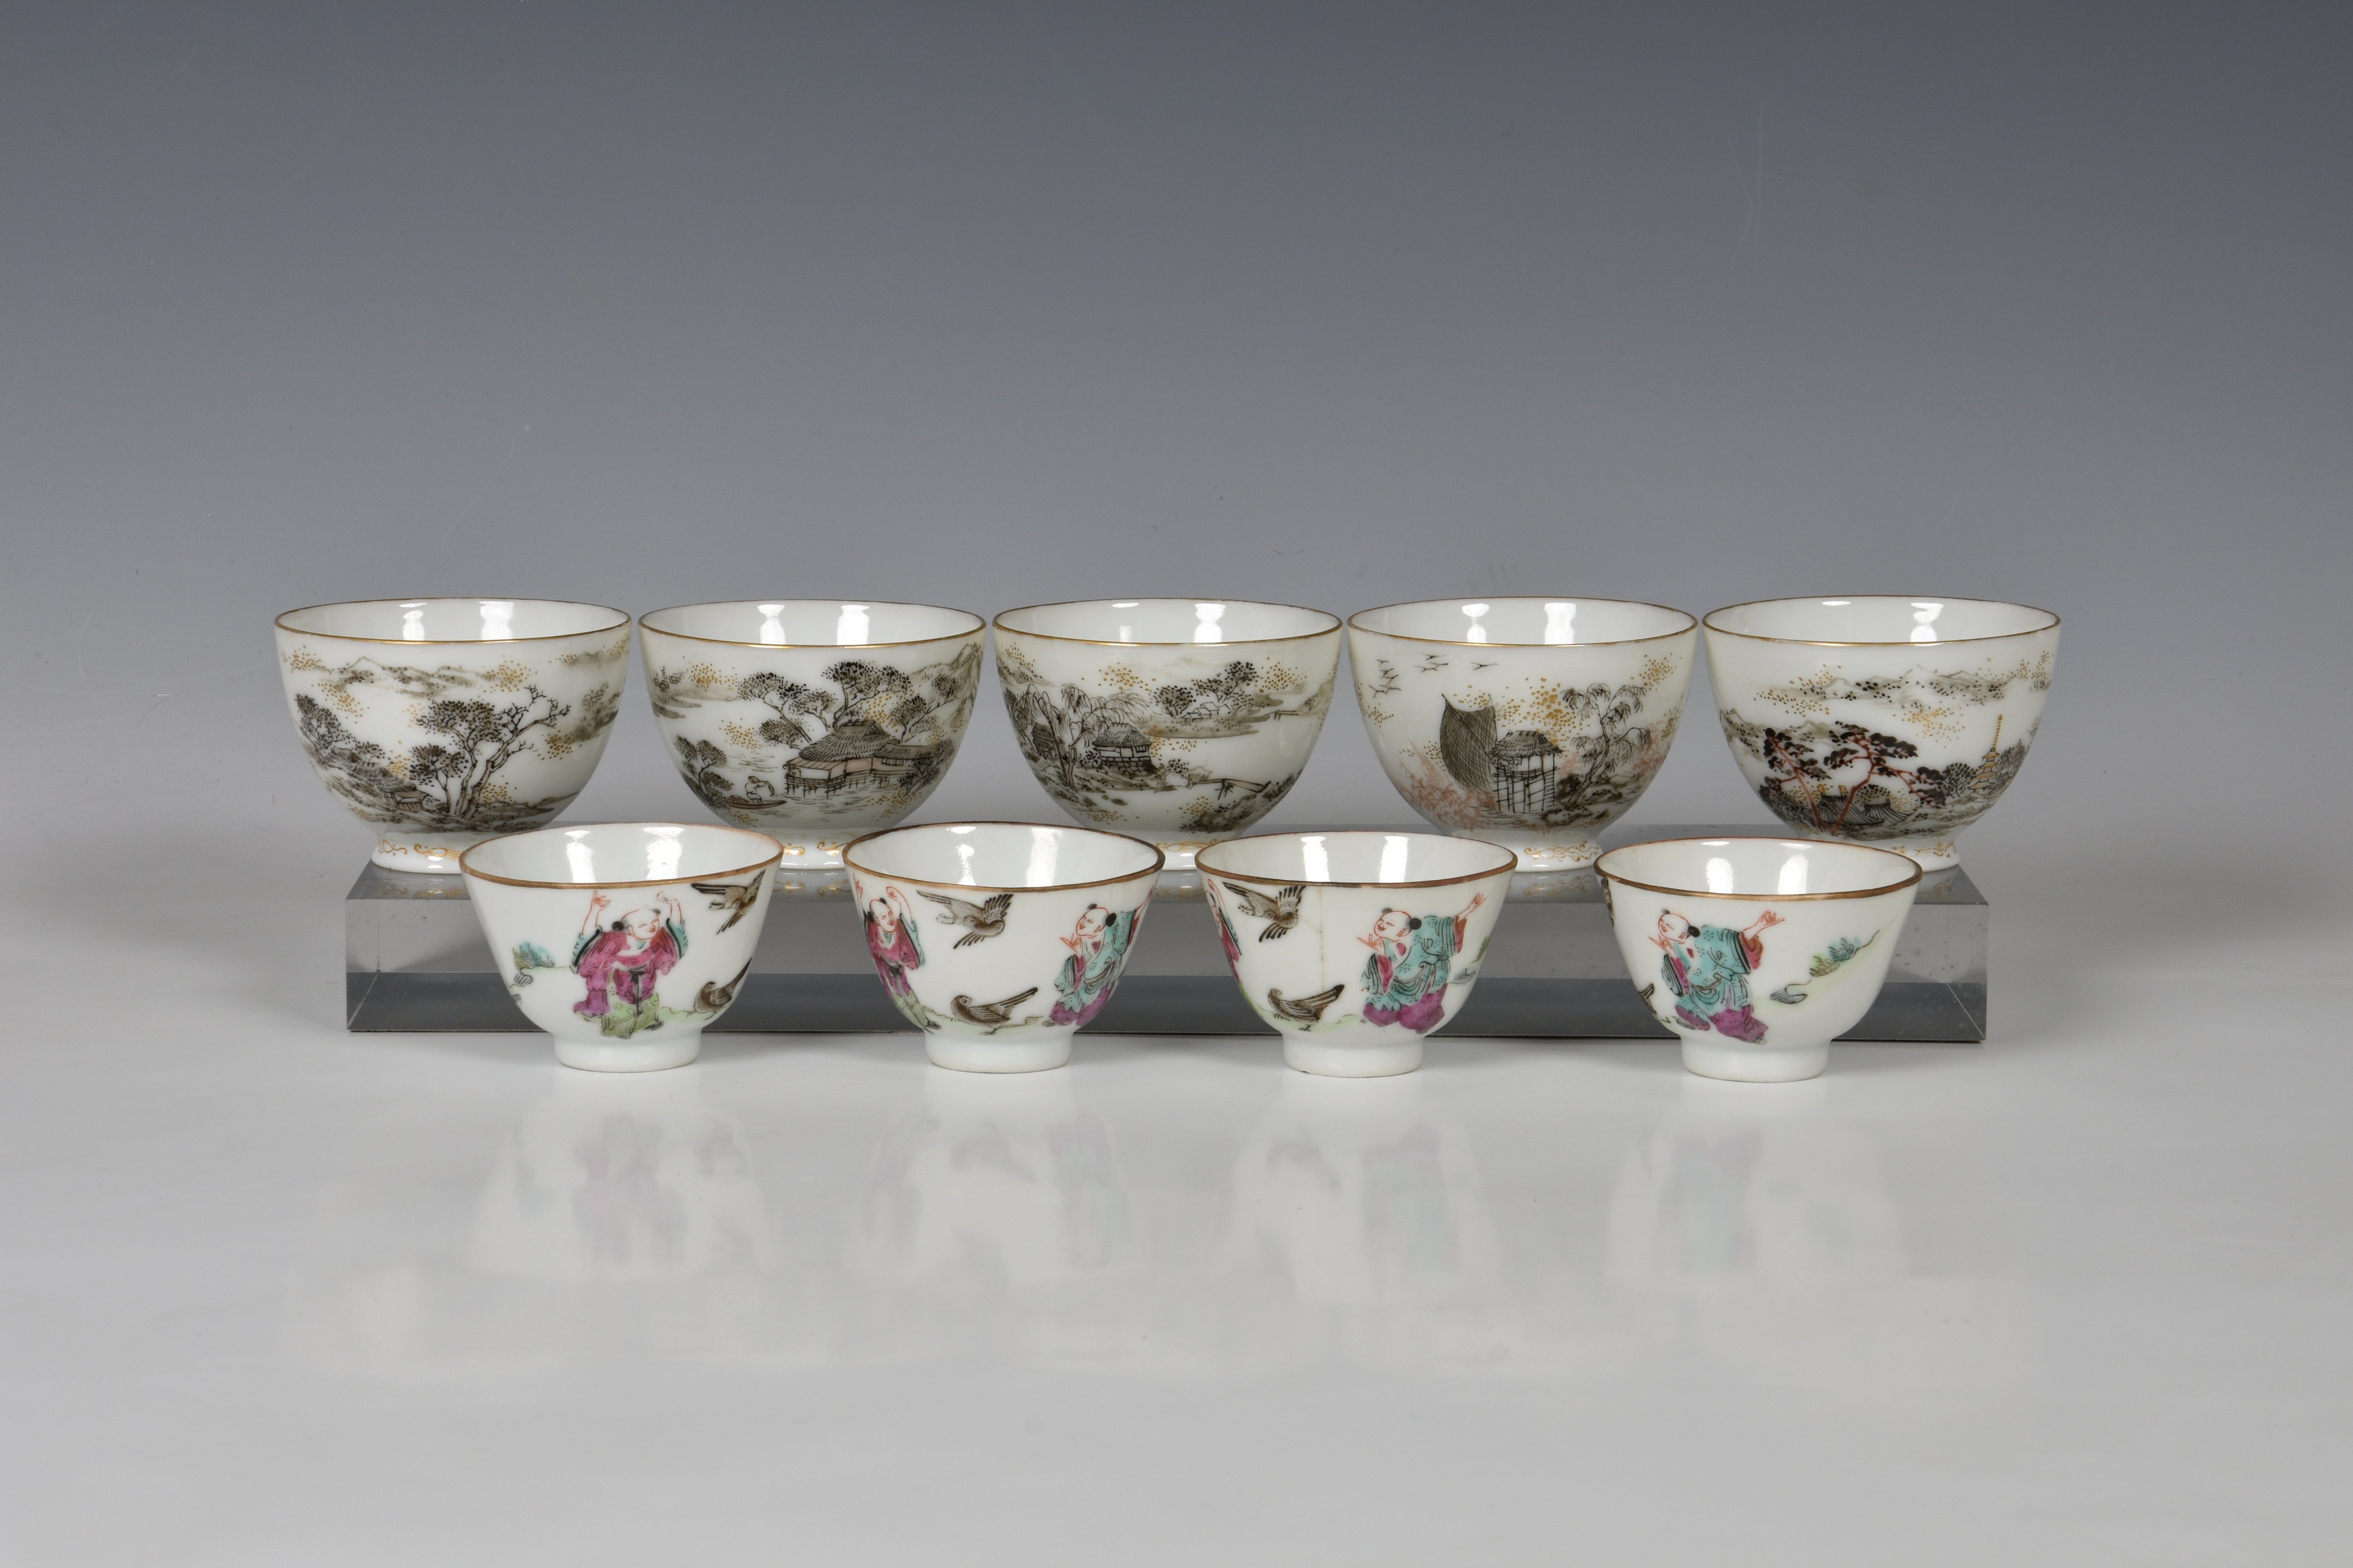 A set of five Chinese porcelain tea bowls, 20th century, finely enamelled in black, iron red and